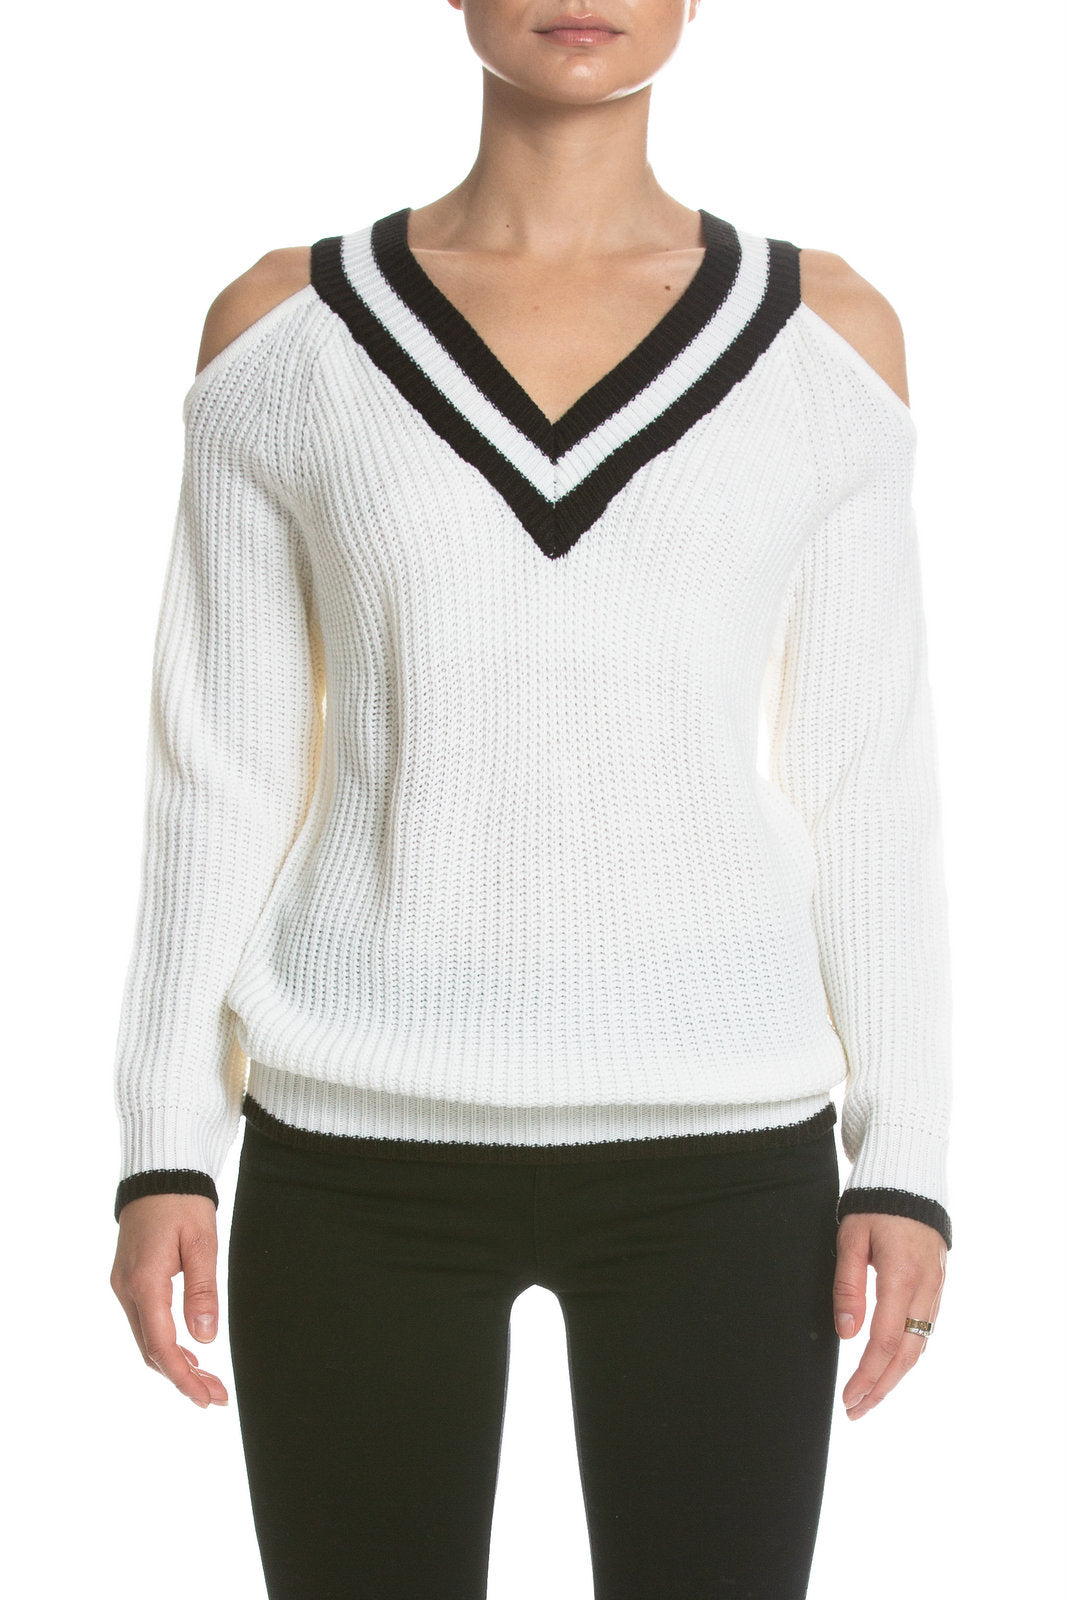 Ivory and Black Cut Out Varsity Sweater